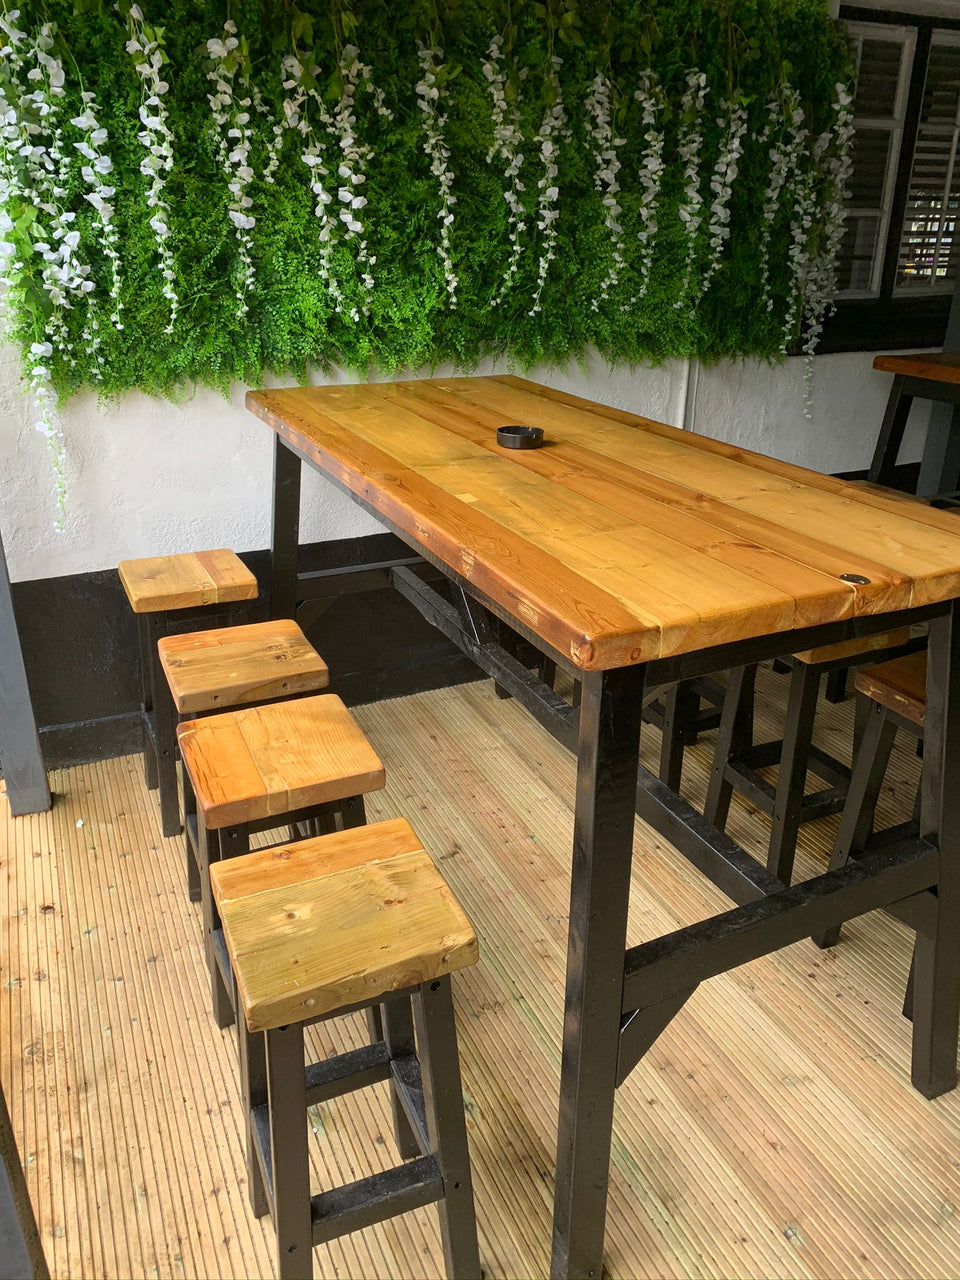 Rustic Timber Breakfast Bar style dining table with stools (120cm-200cm)